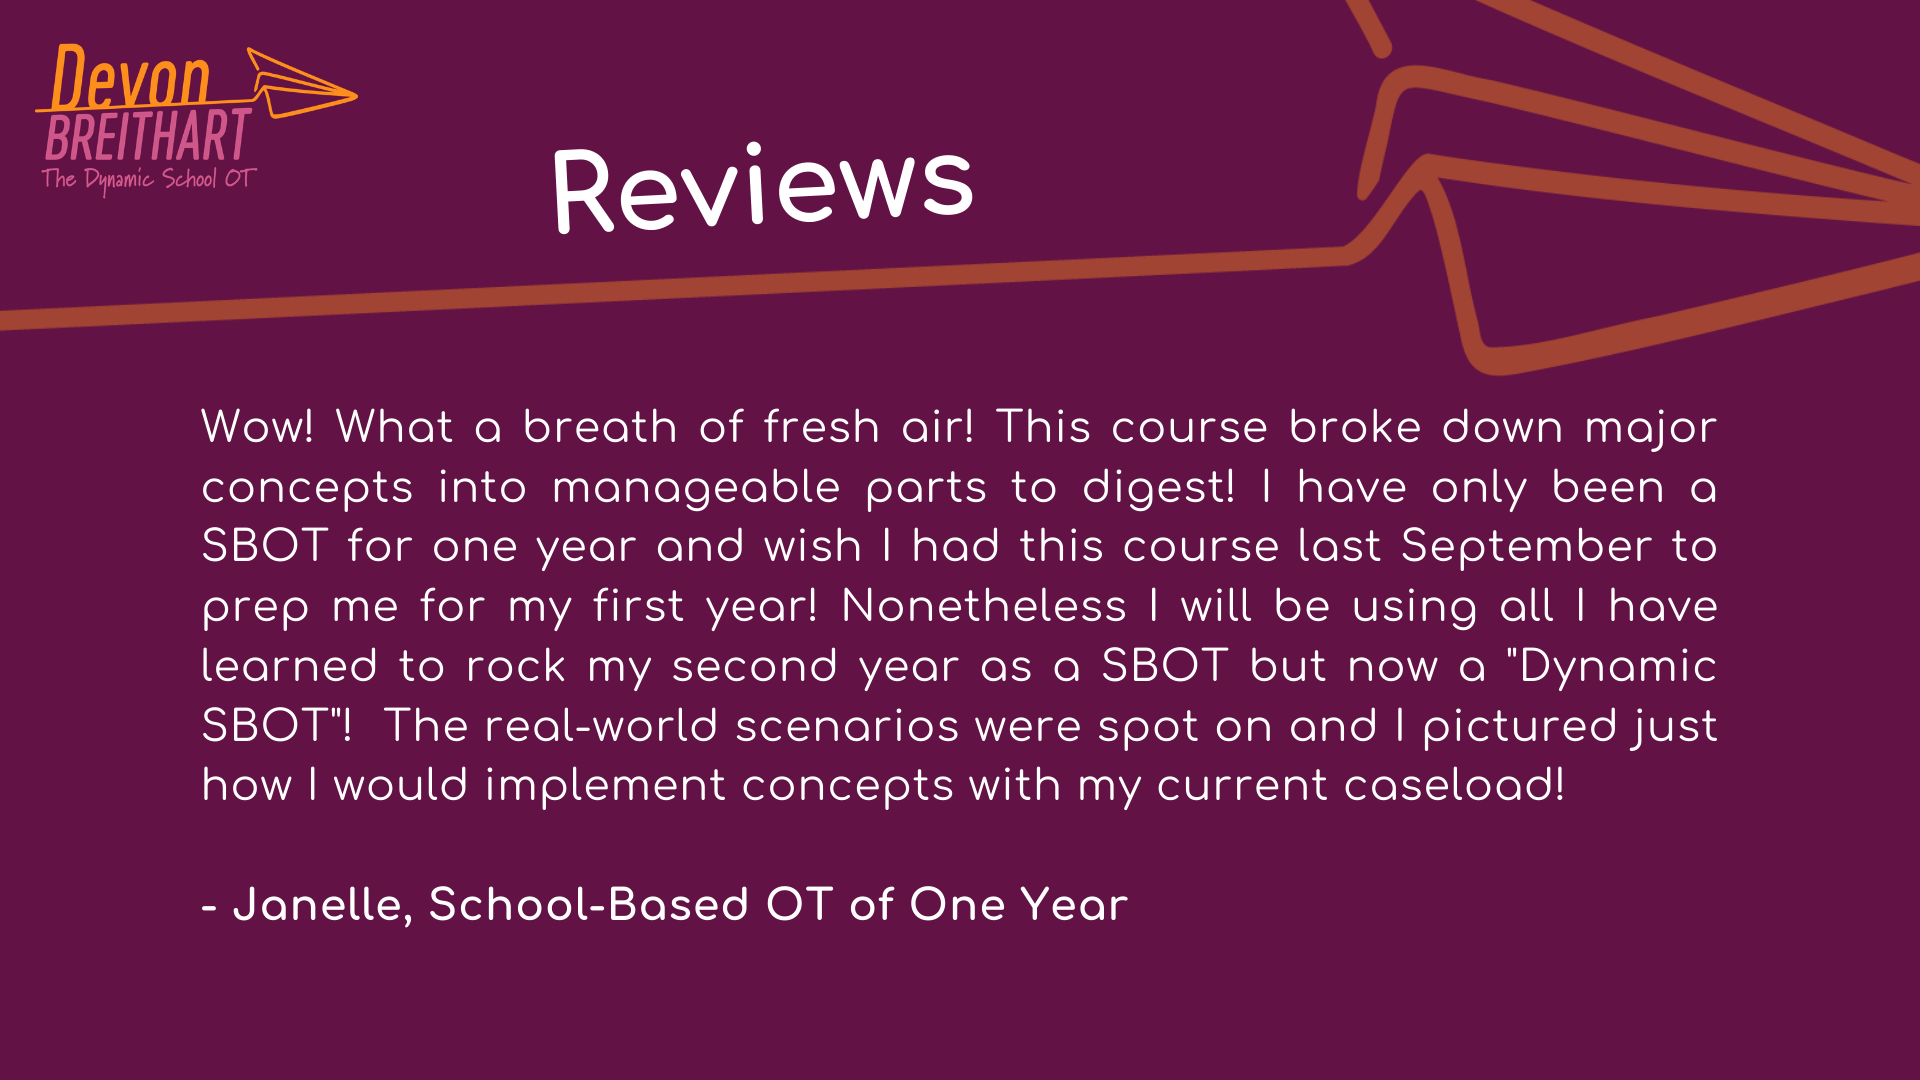 Review of The Dynamic School OT